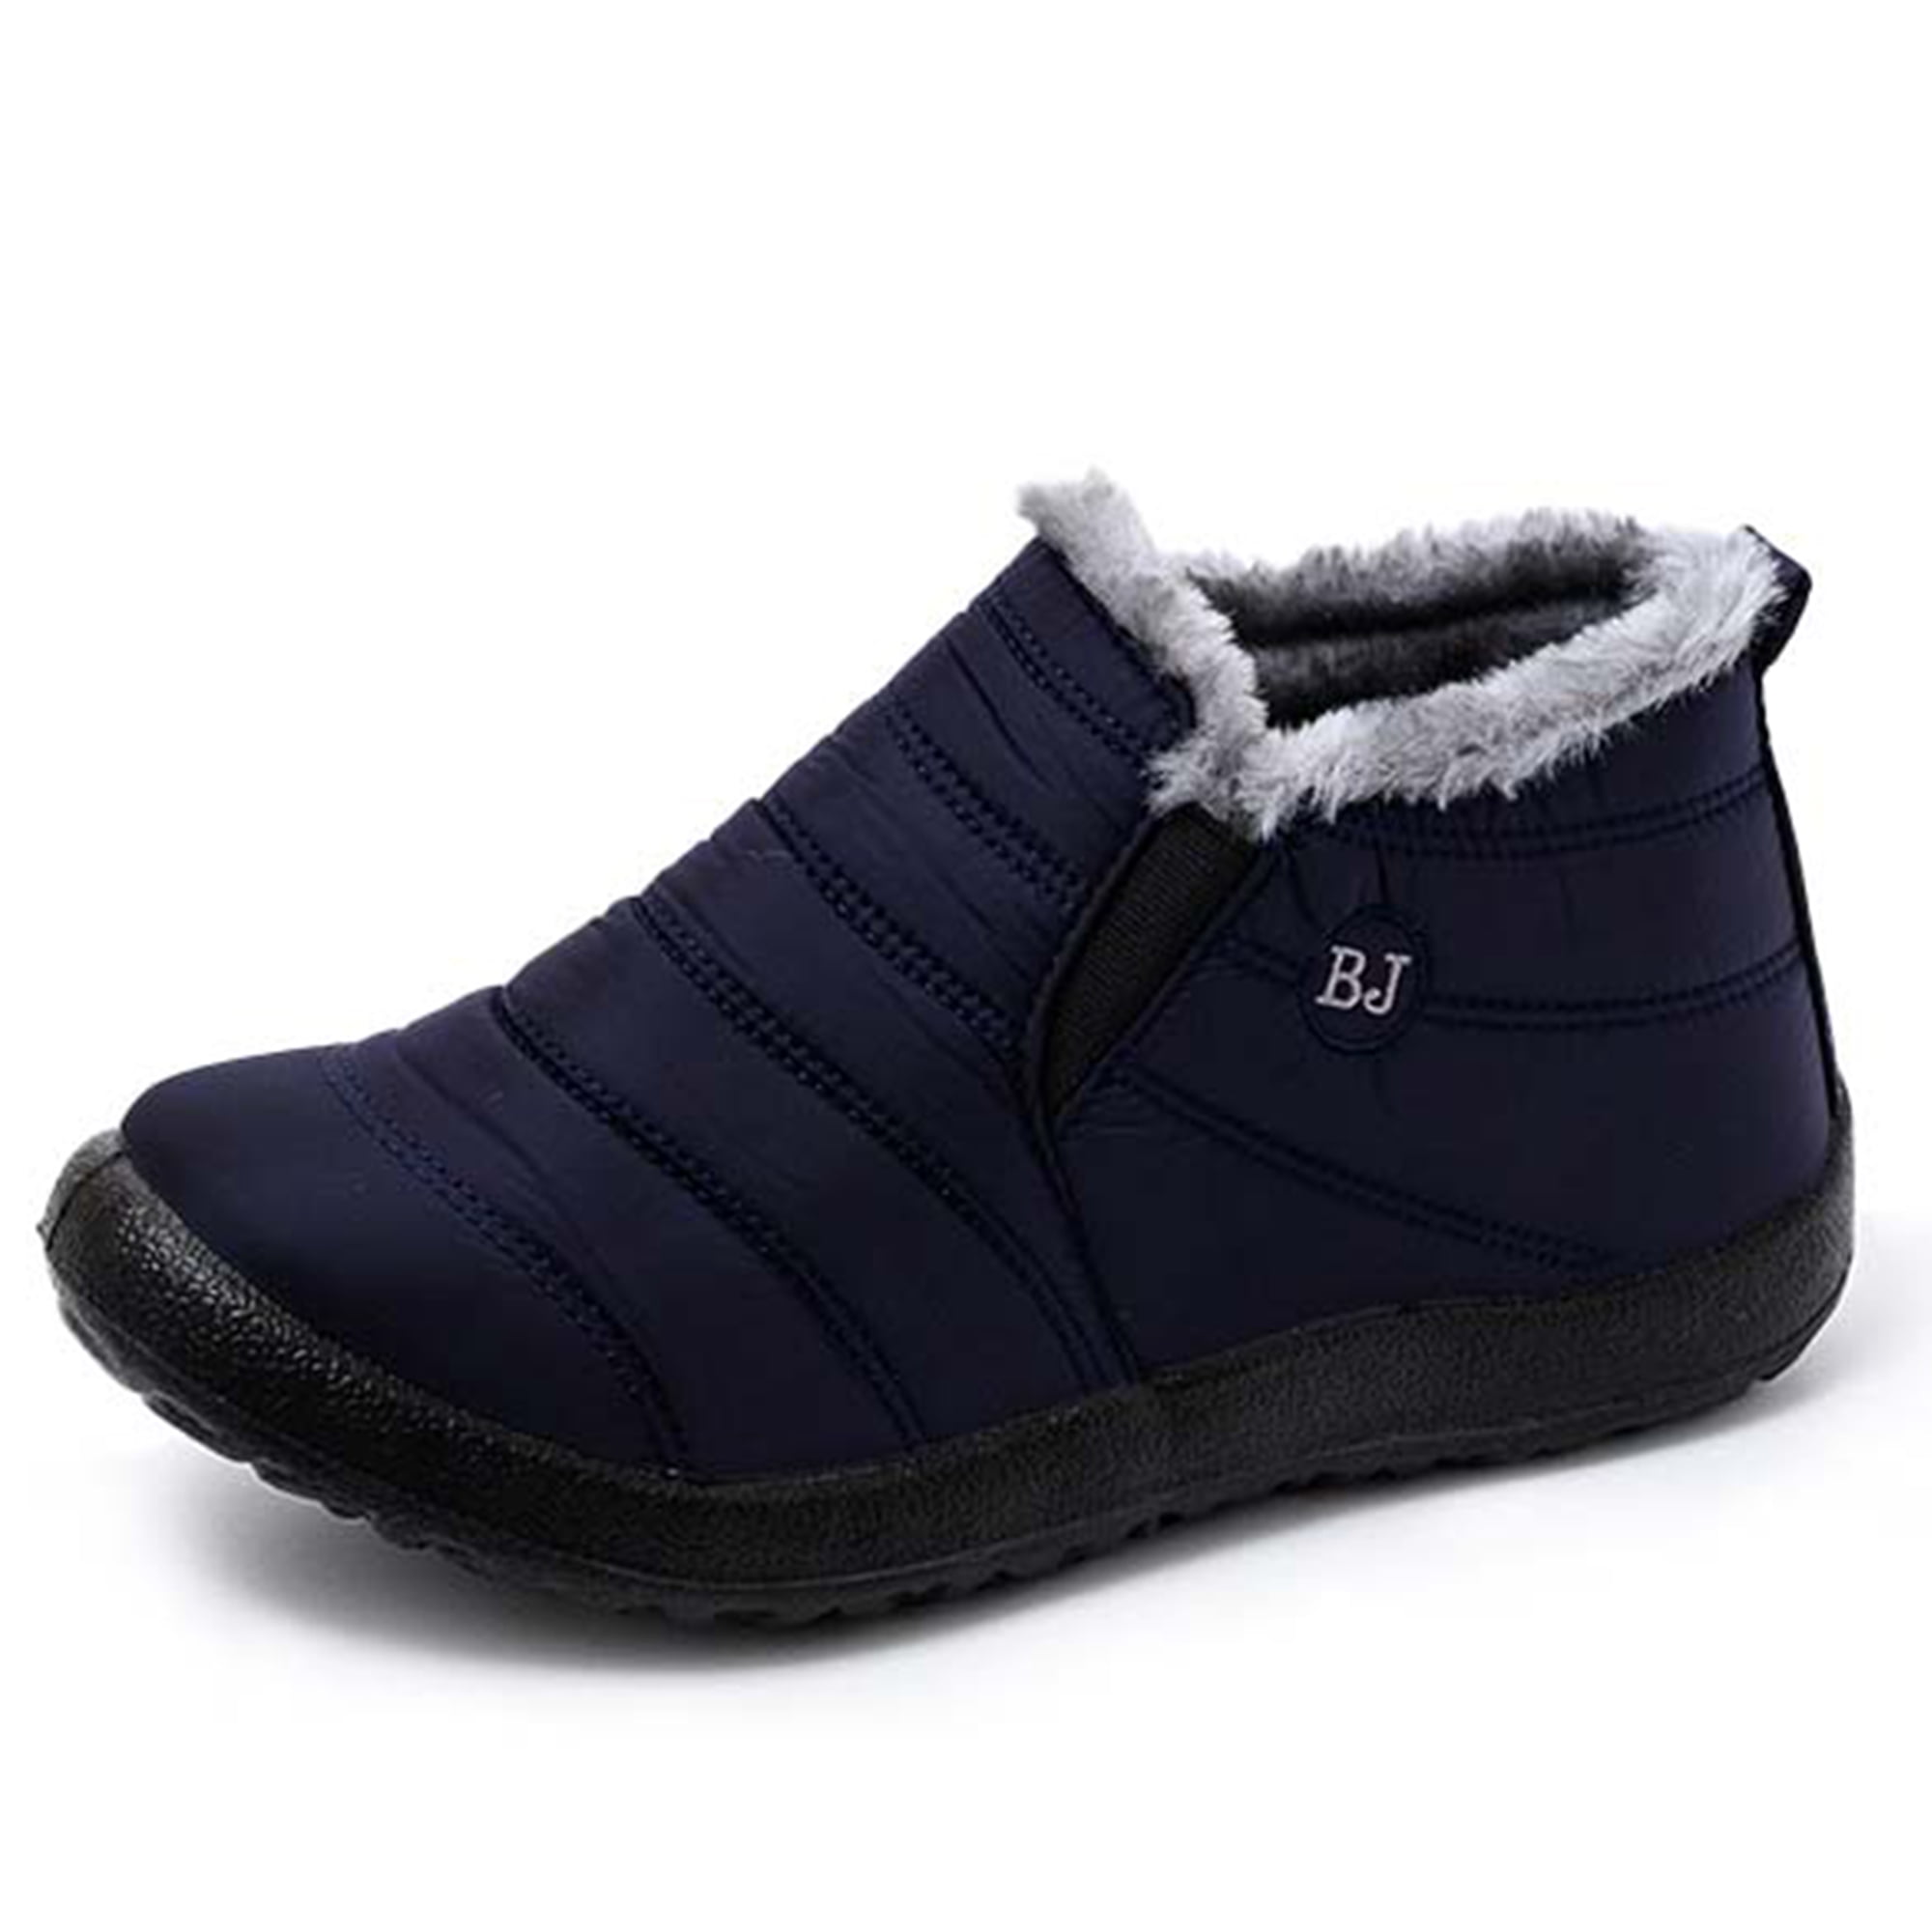 Adibosy Womens Winter Snow Boots Artificial Fur Lined Warm Ankle Boots ...